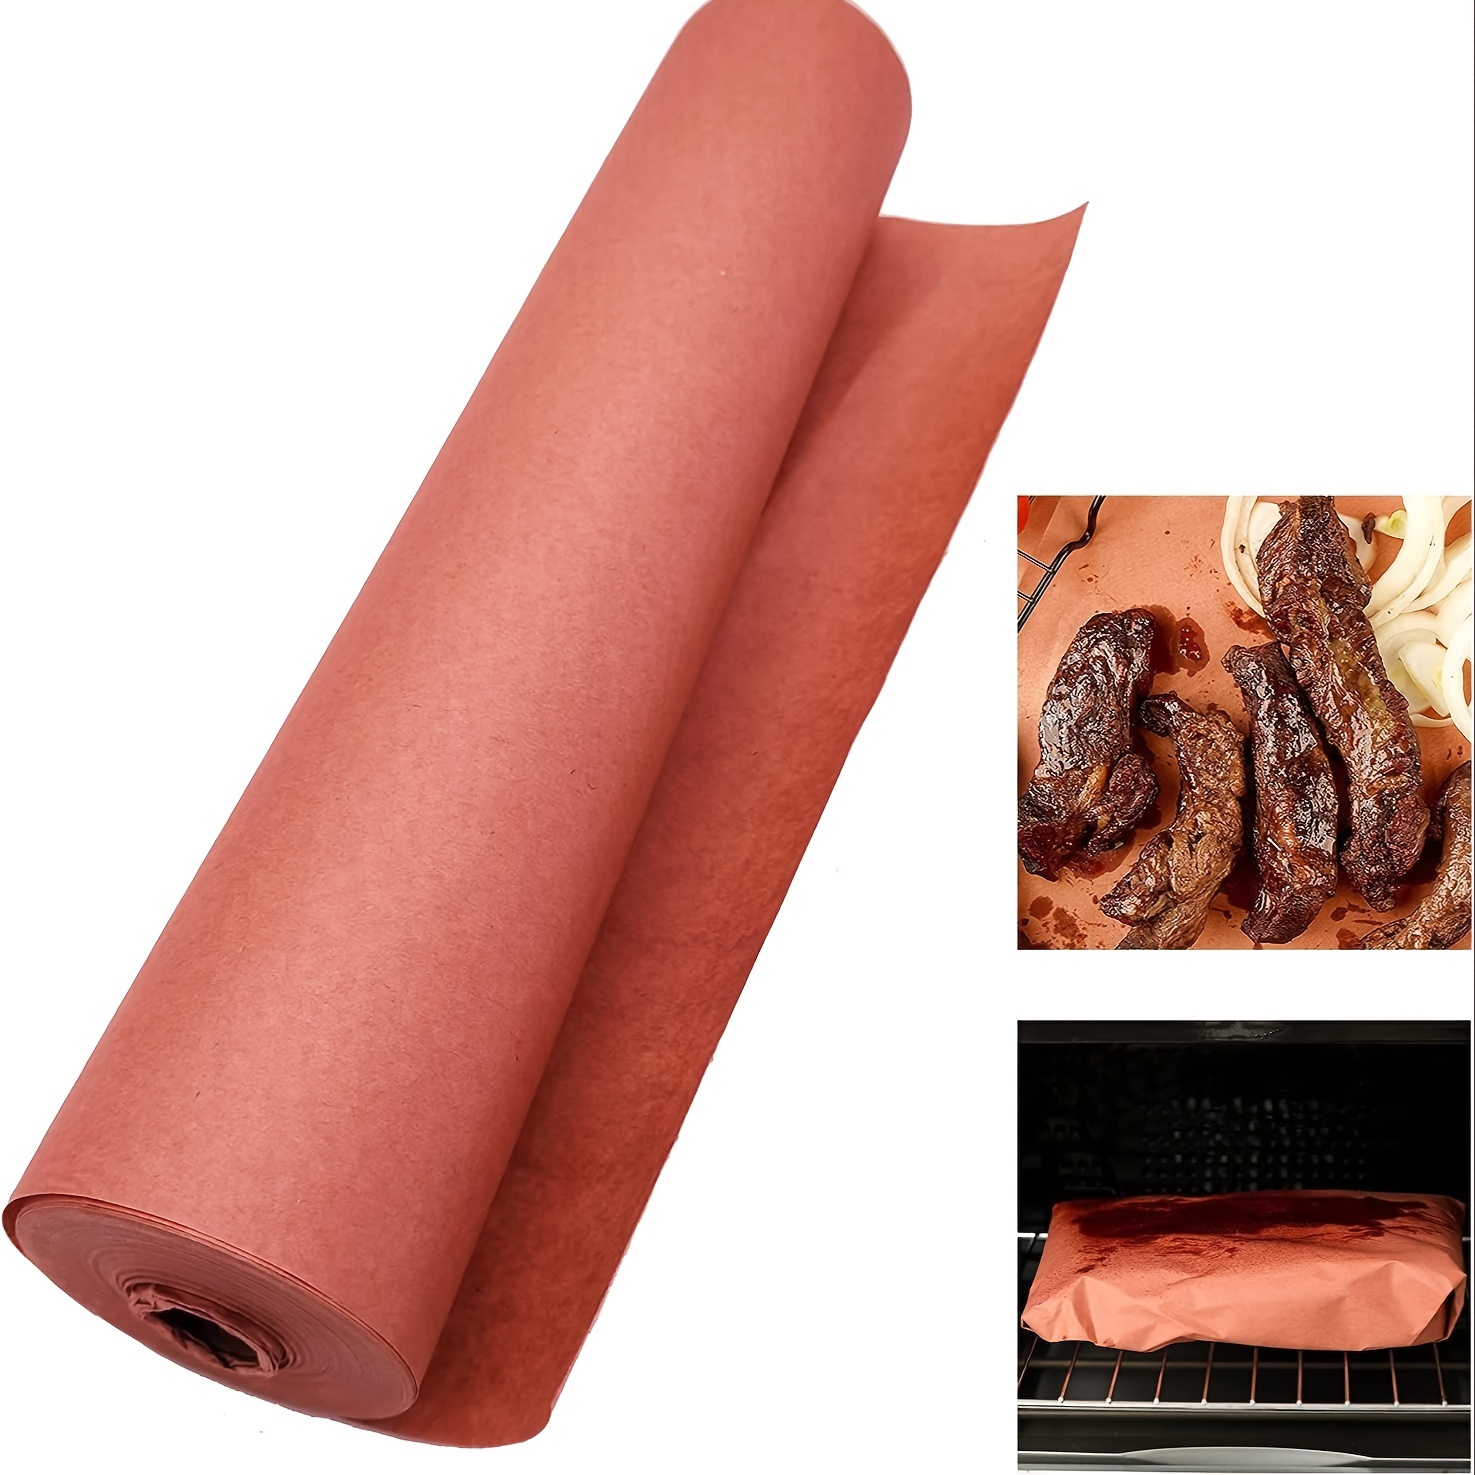 Pink Butcher BBQ Paper Roll (18 inch by 50 Feet) - Food Grade Peach Wrapping Paper for Smoking Beef Brisket Meat Texas Style, All Natural and